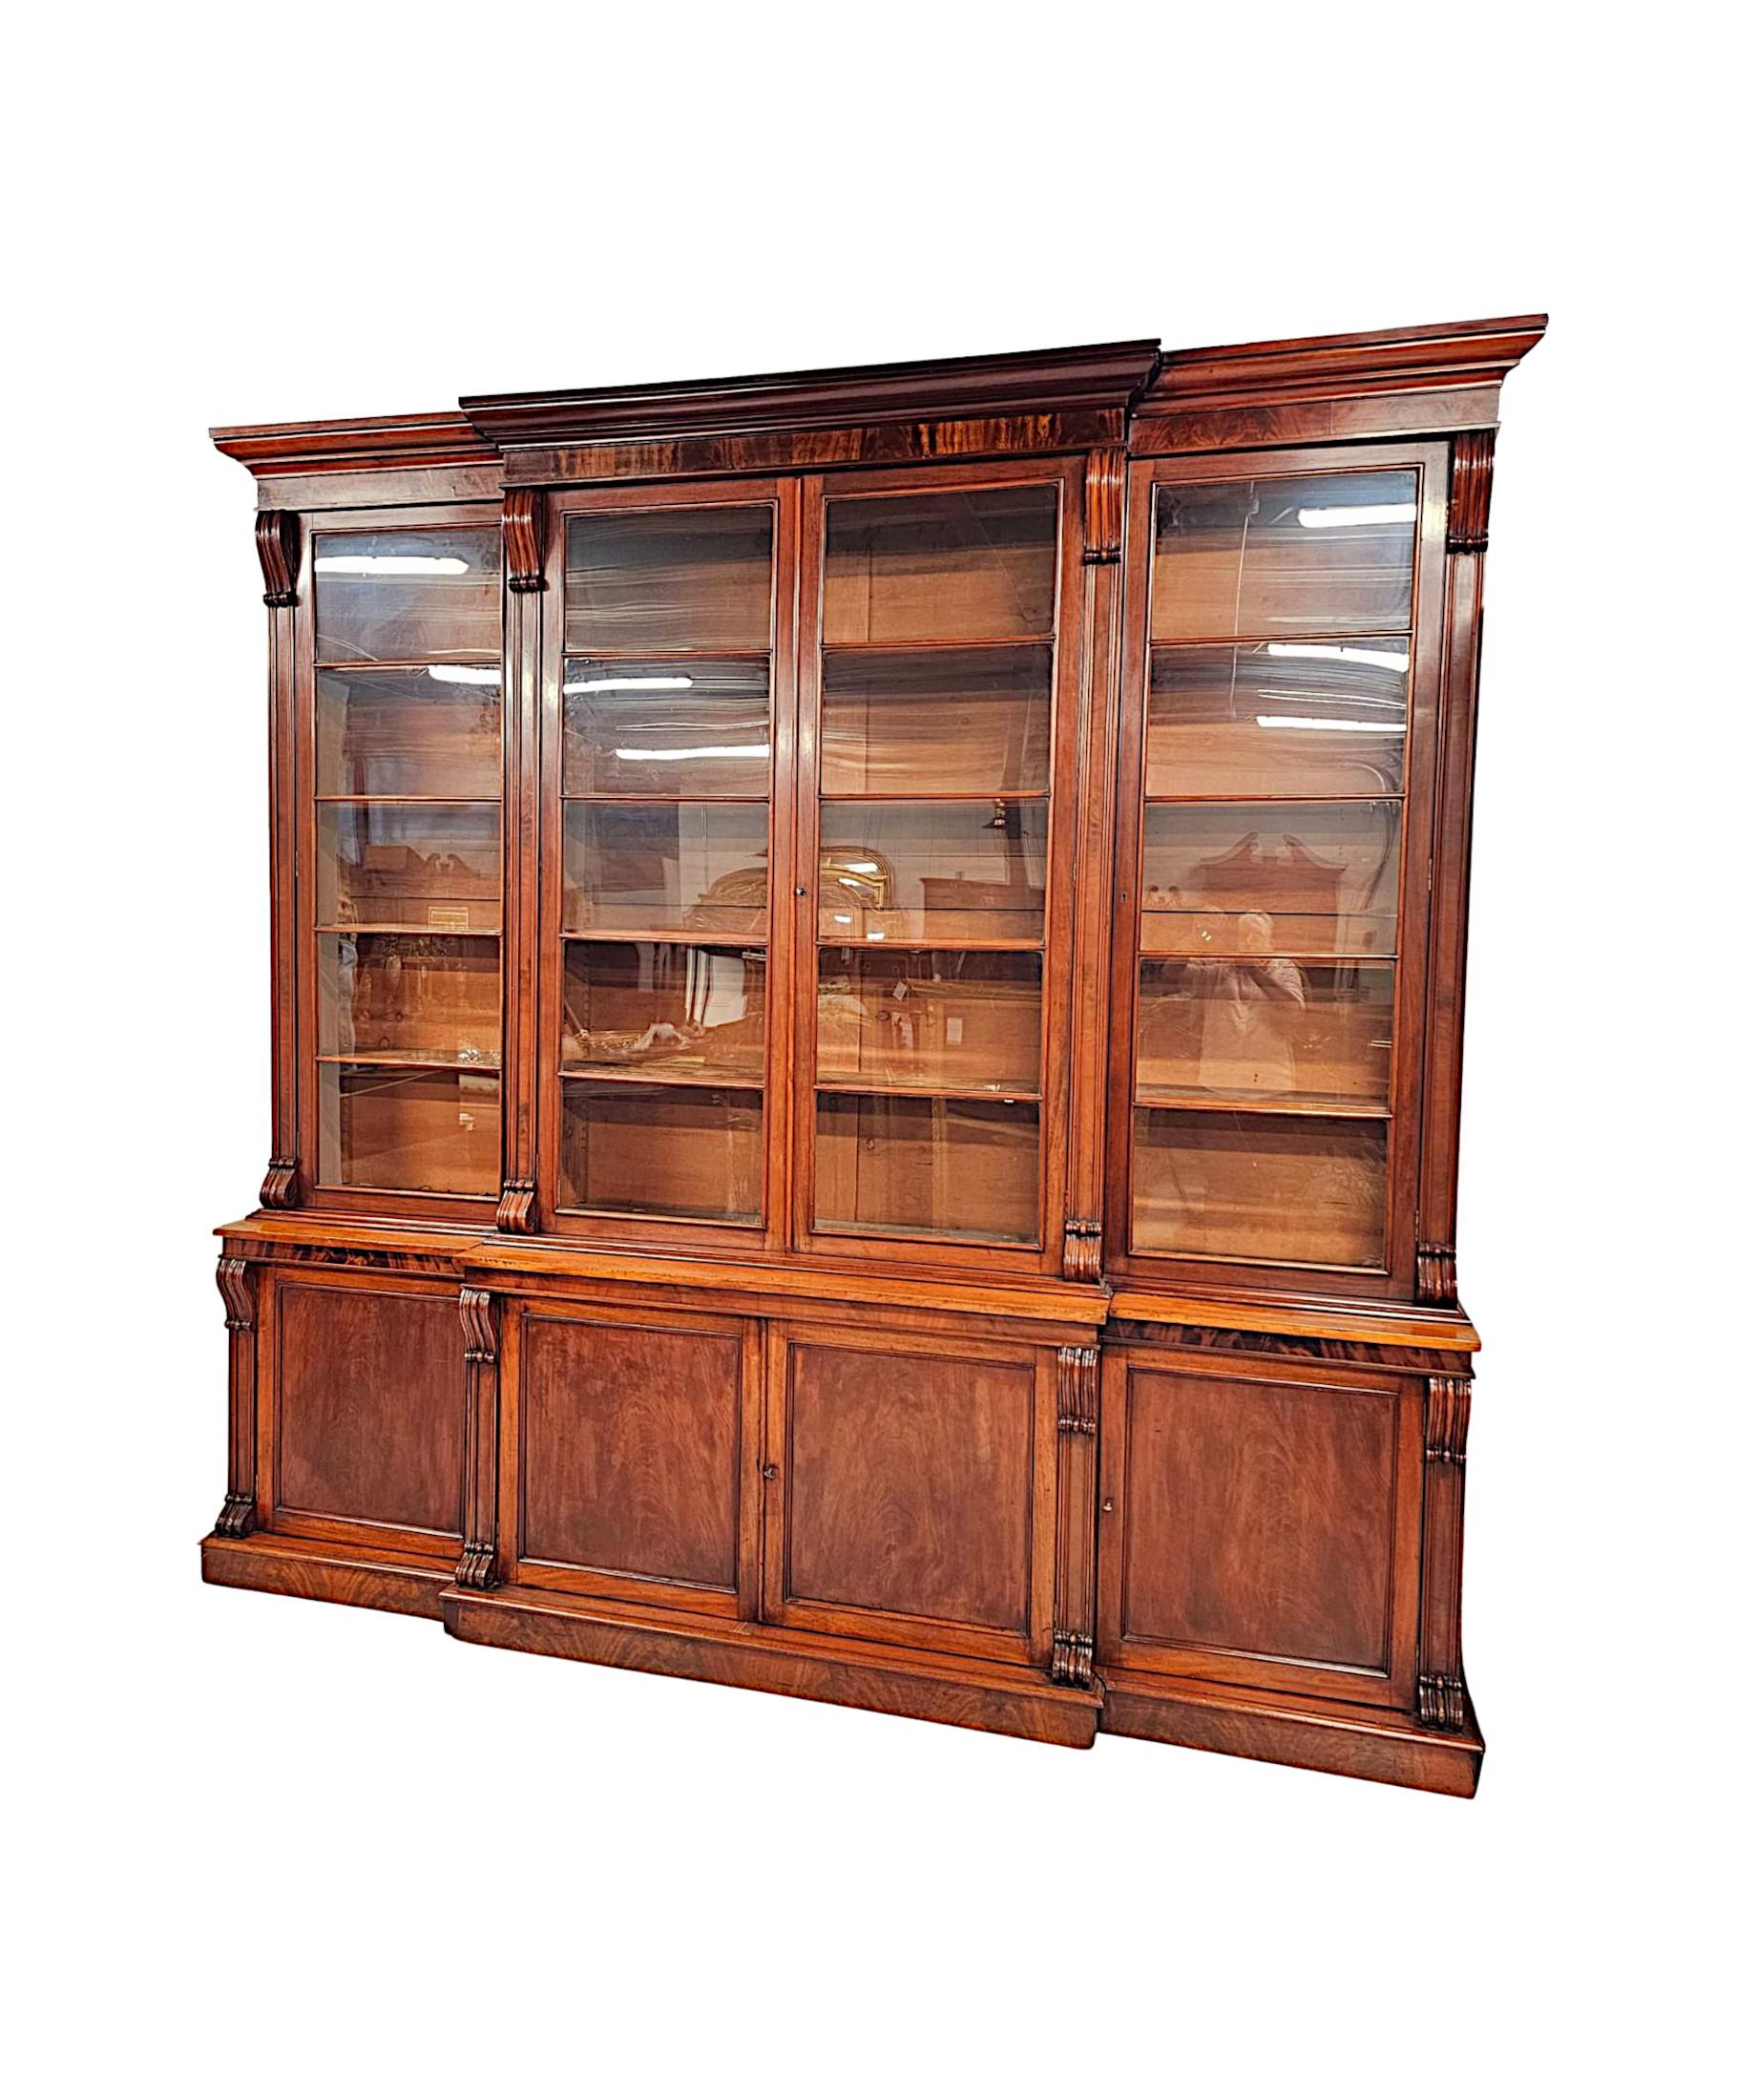 A very rare and impressive 19th Century Irish well figured, flame mahogany four door breakfront bookcase labelled 'Strahan of Dublin', finely hand carved, of grand proportions, exceptional quality and with gorgeously rich patination and fine grain. 